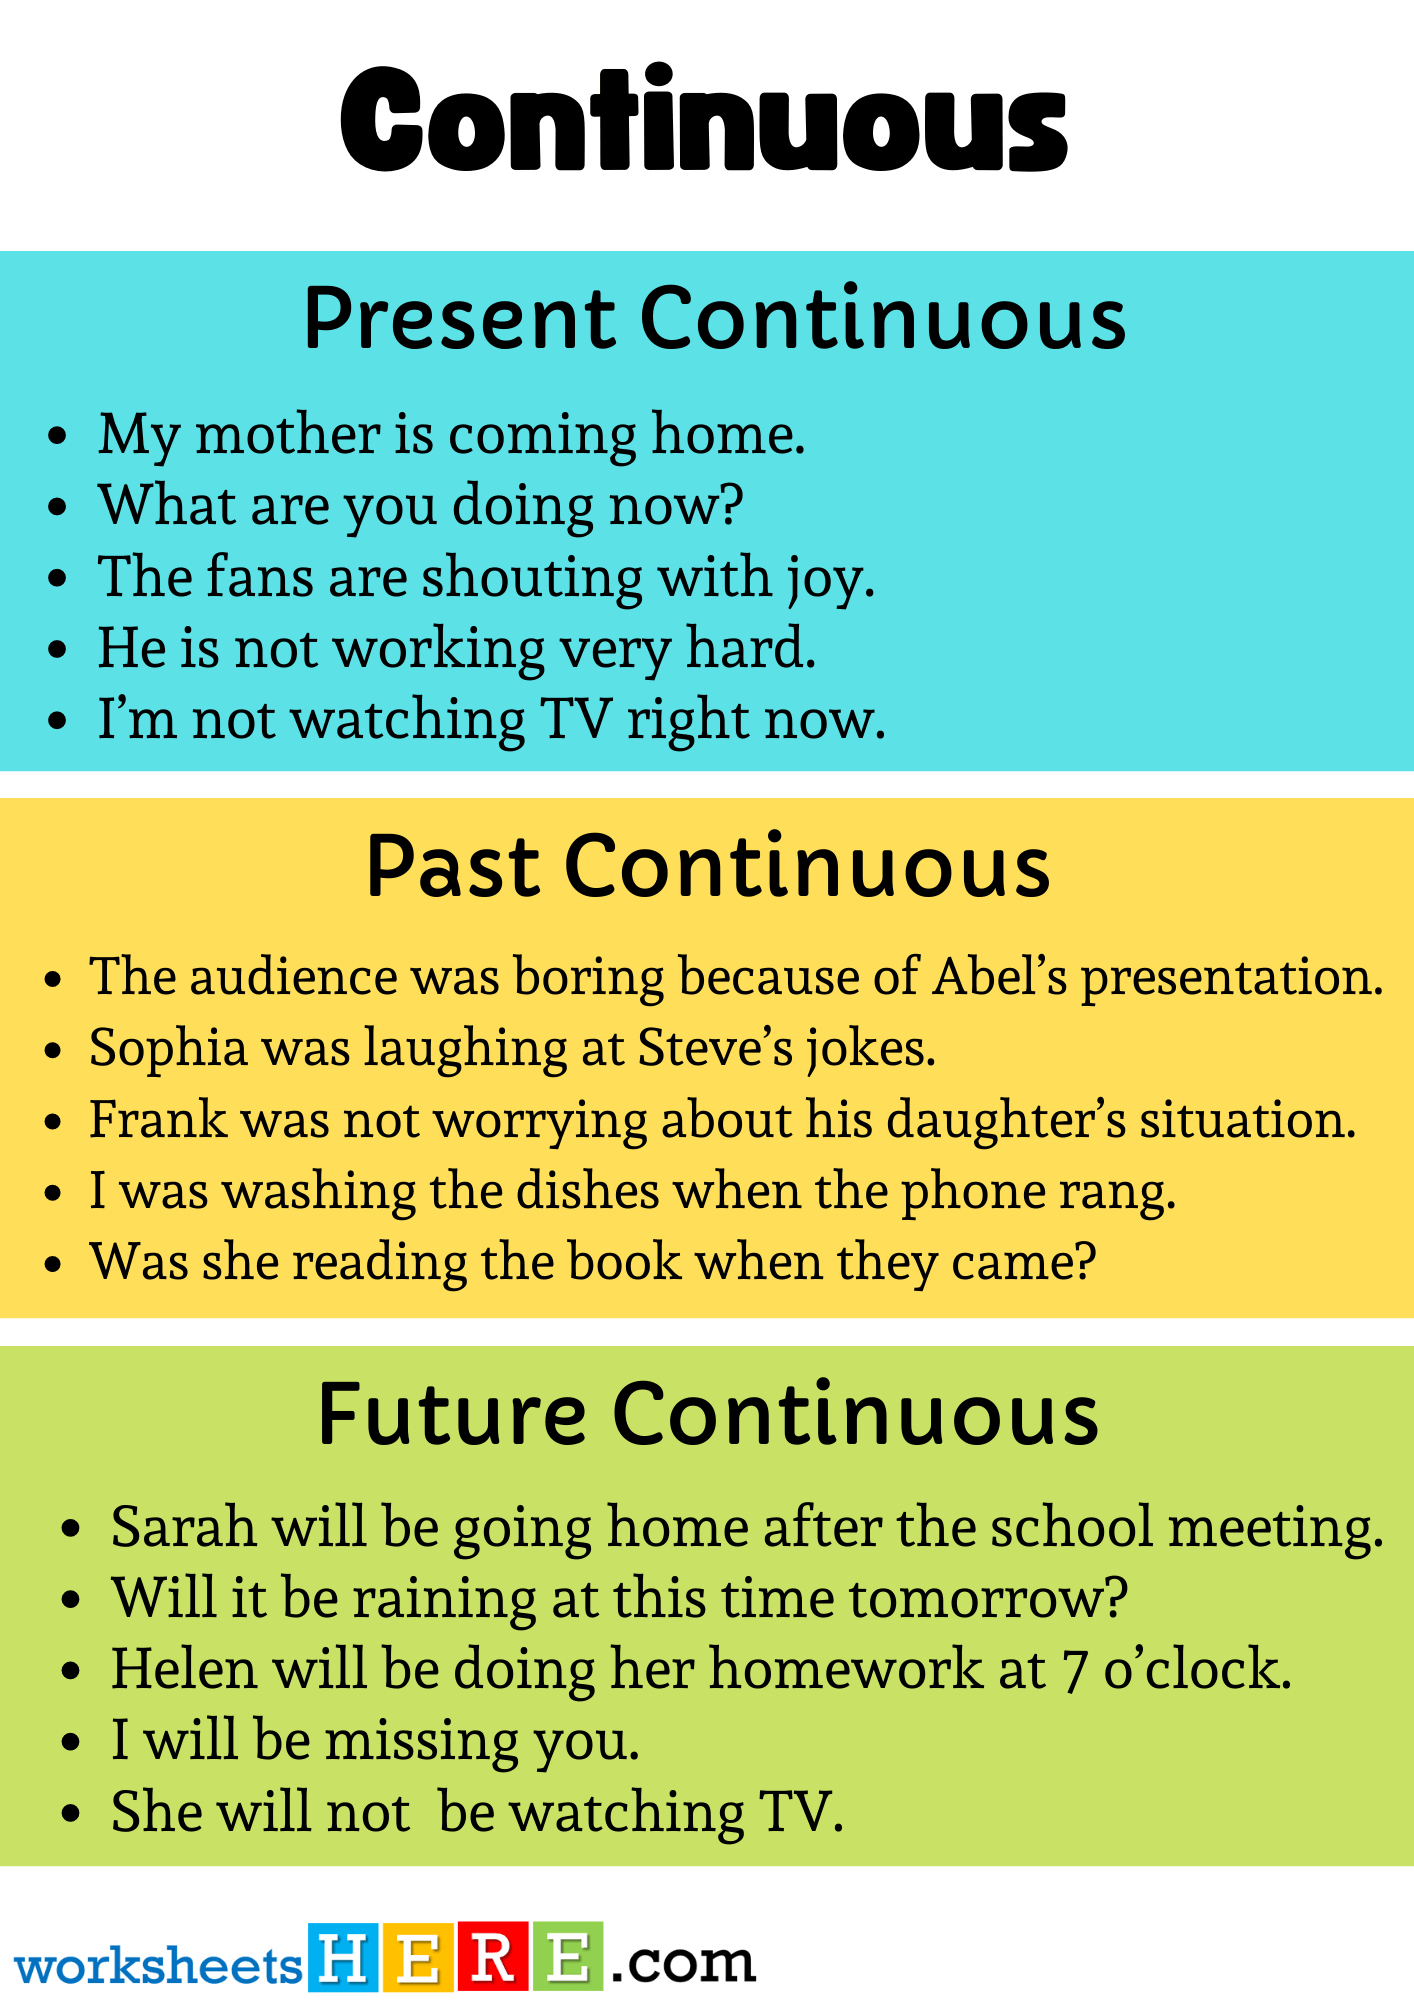 Present Past and Future Continuous Tense Example Sentences PDF Worksheet